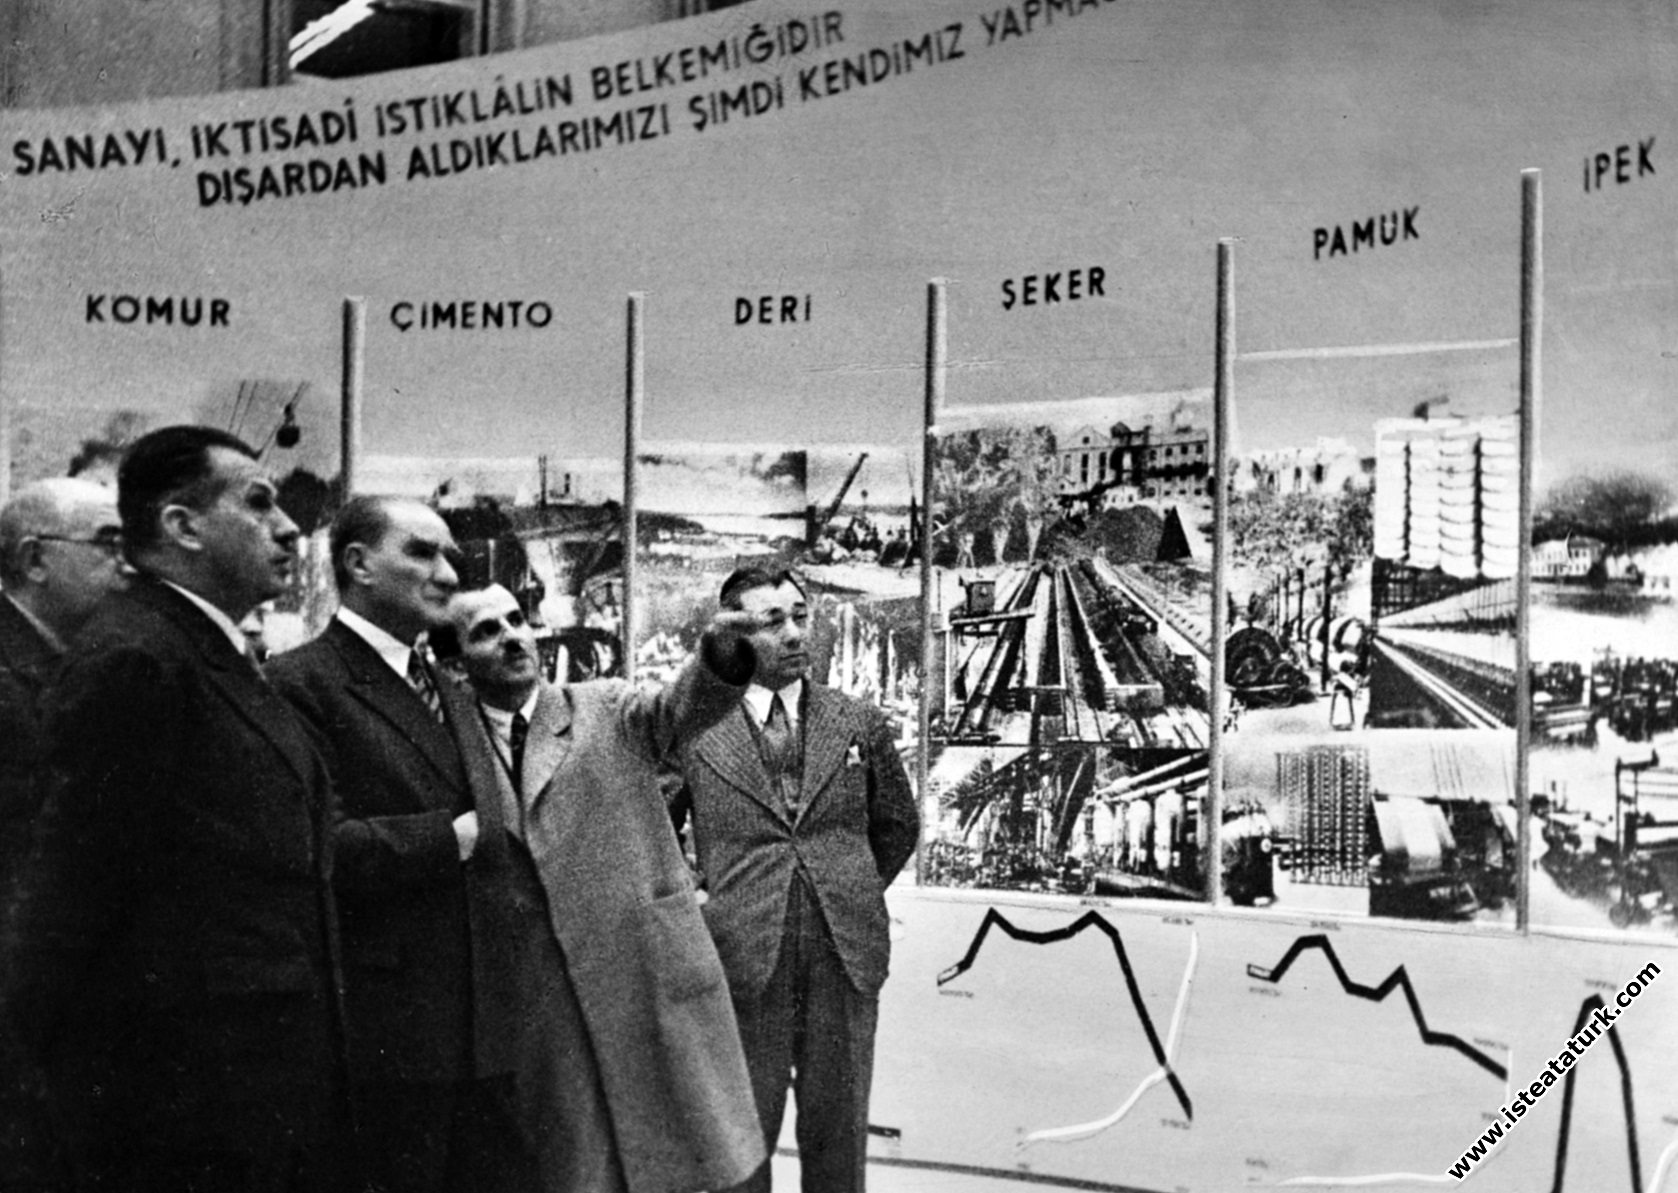 Atatürk visiting the Domestic Goods Exhibition at the Ankara Exhibition House. (10.11.1934)